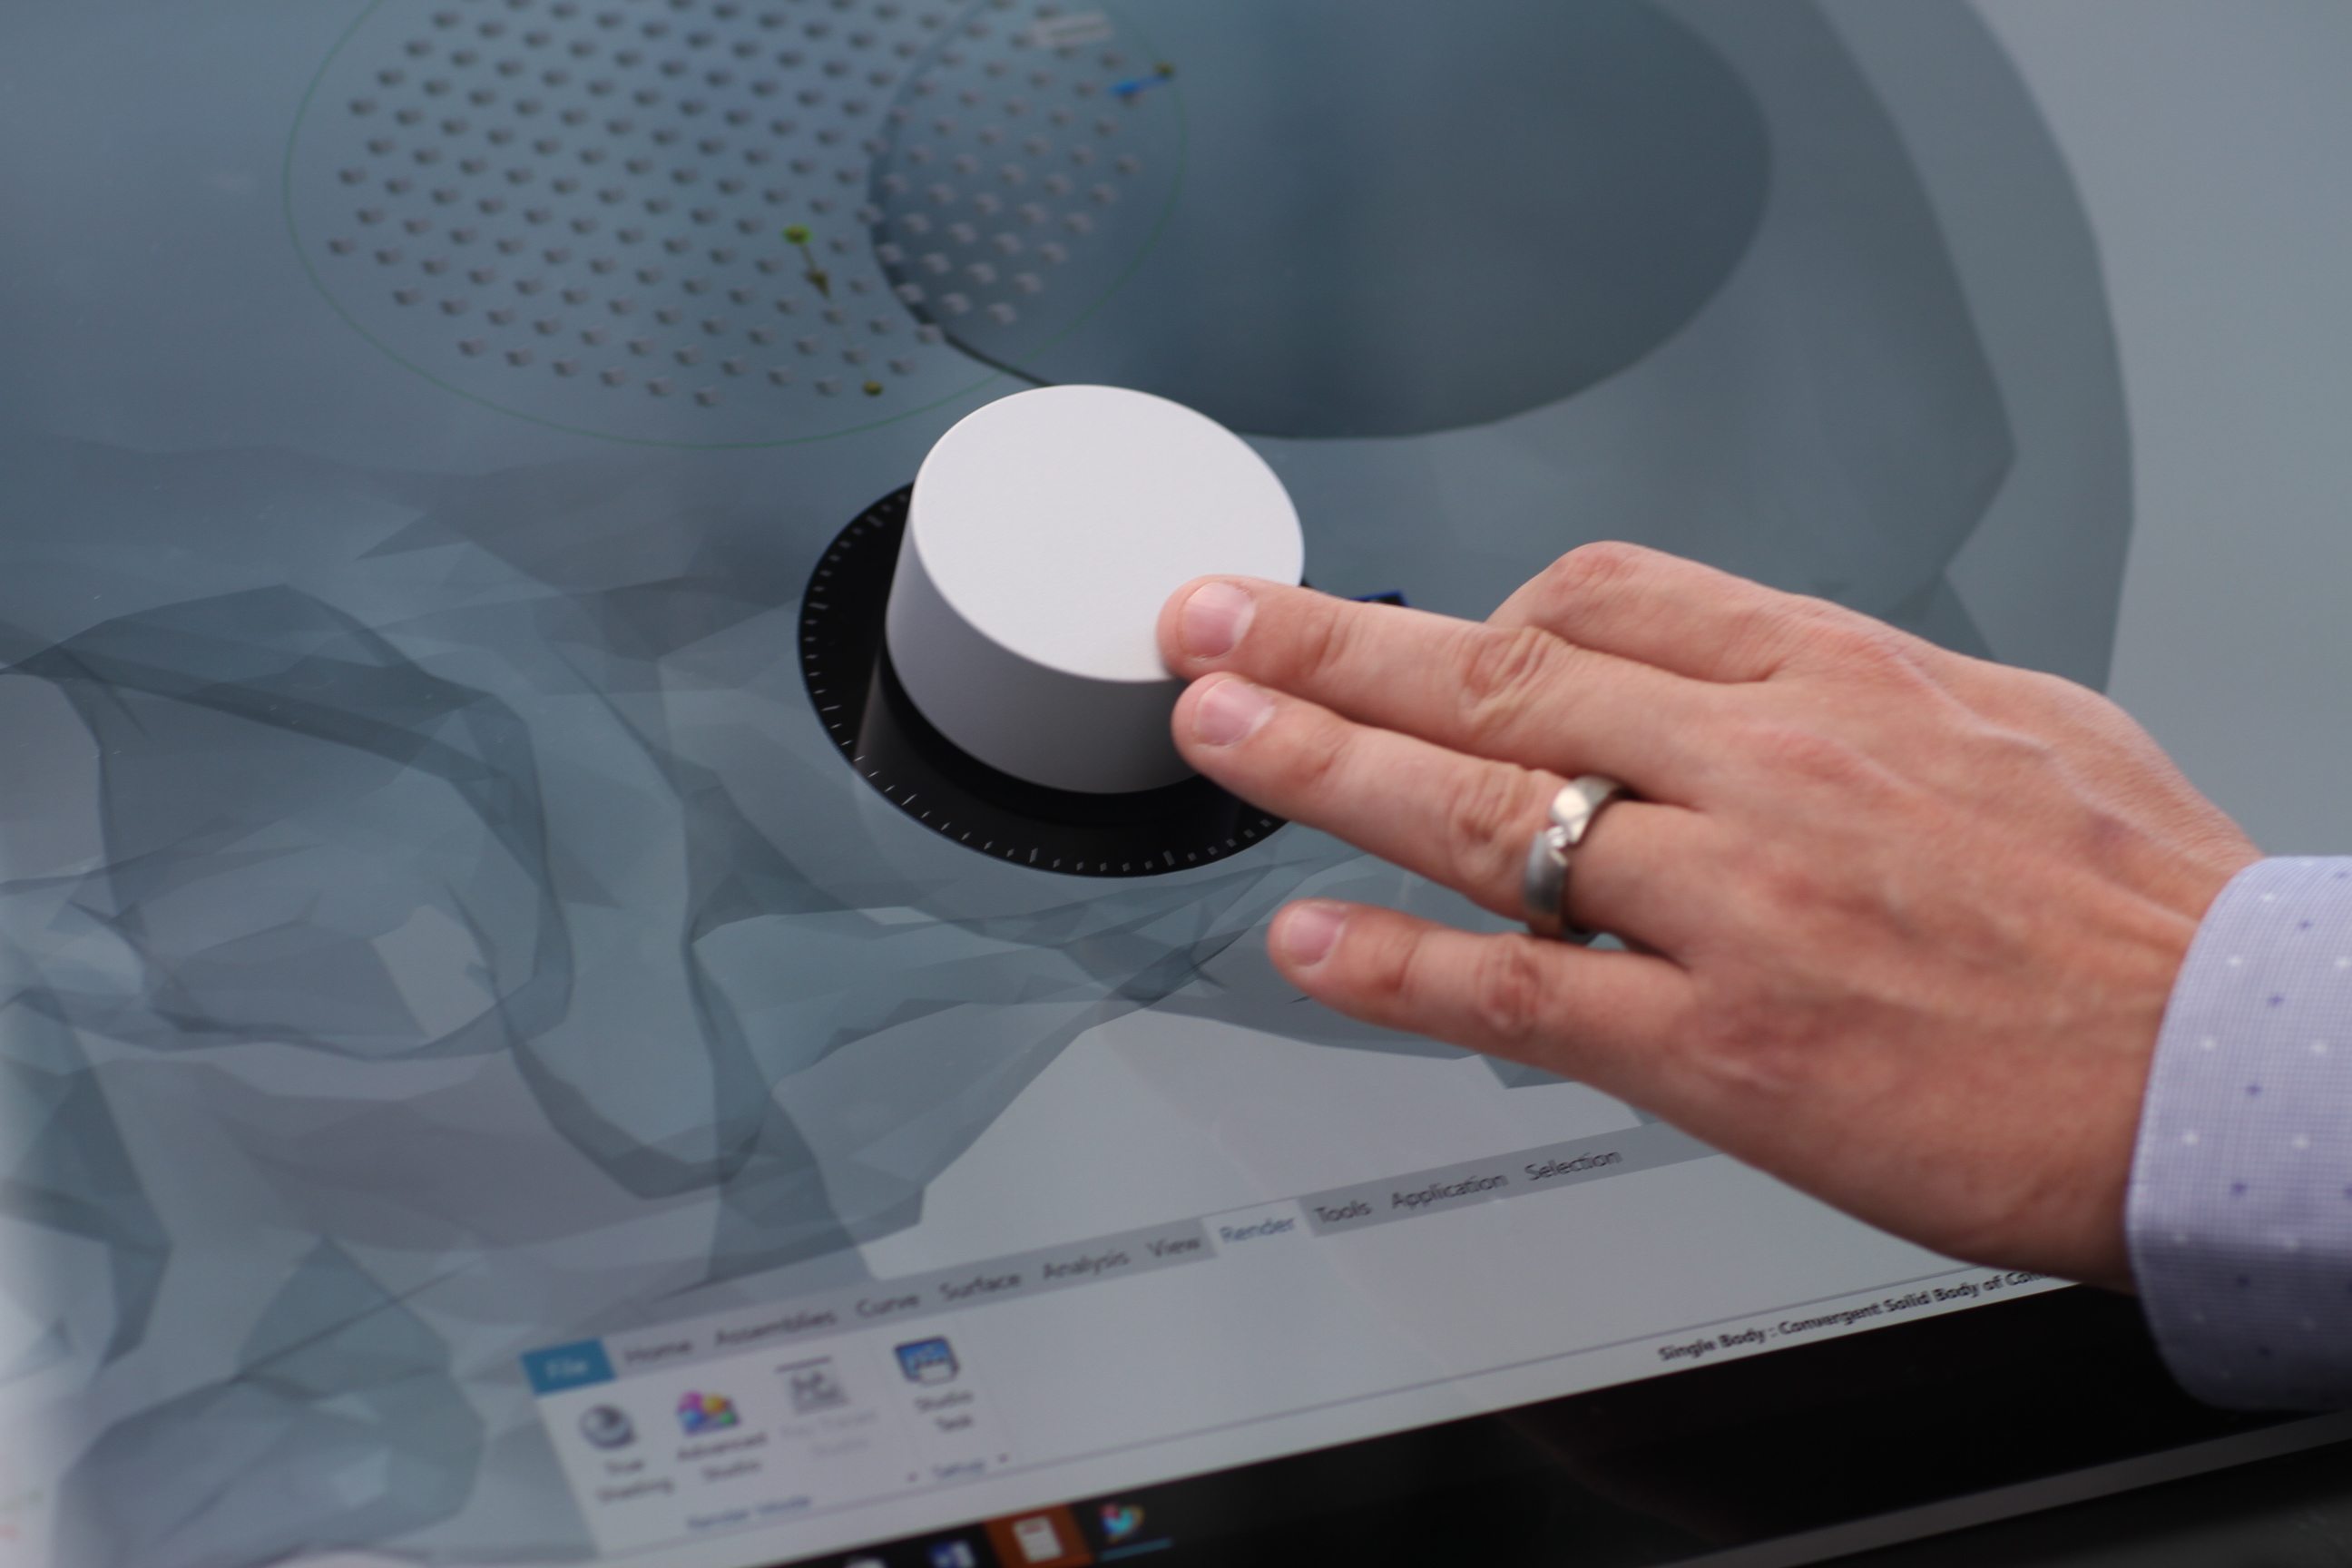 Hands-on with the Surface Dial | TechCrunch